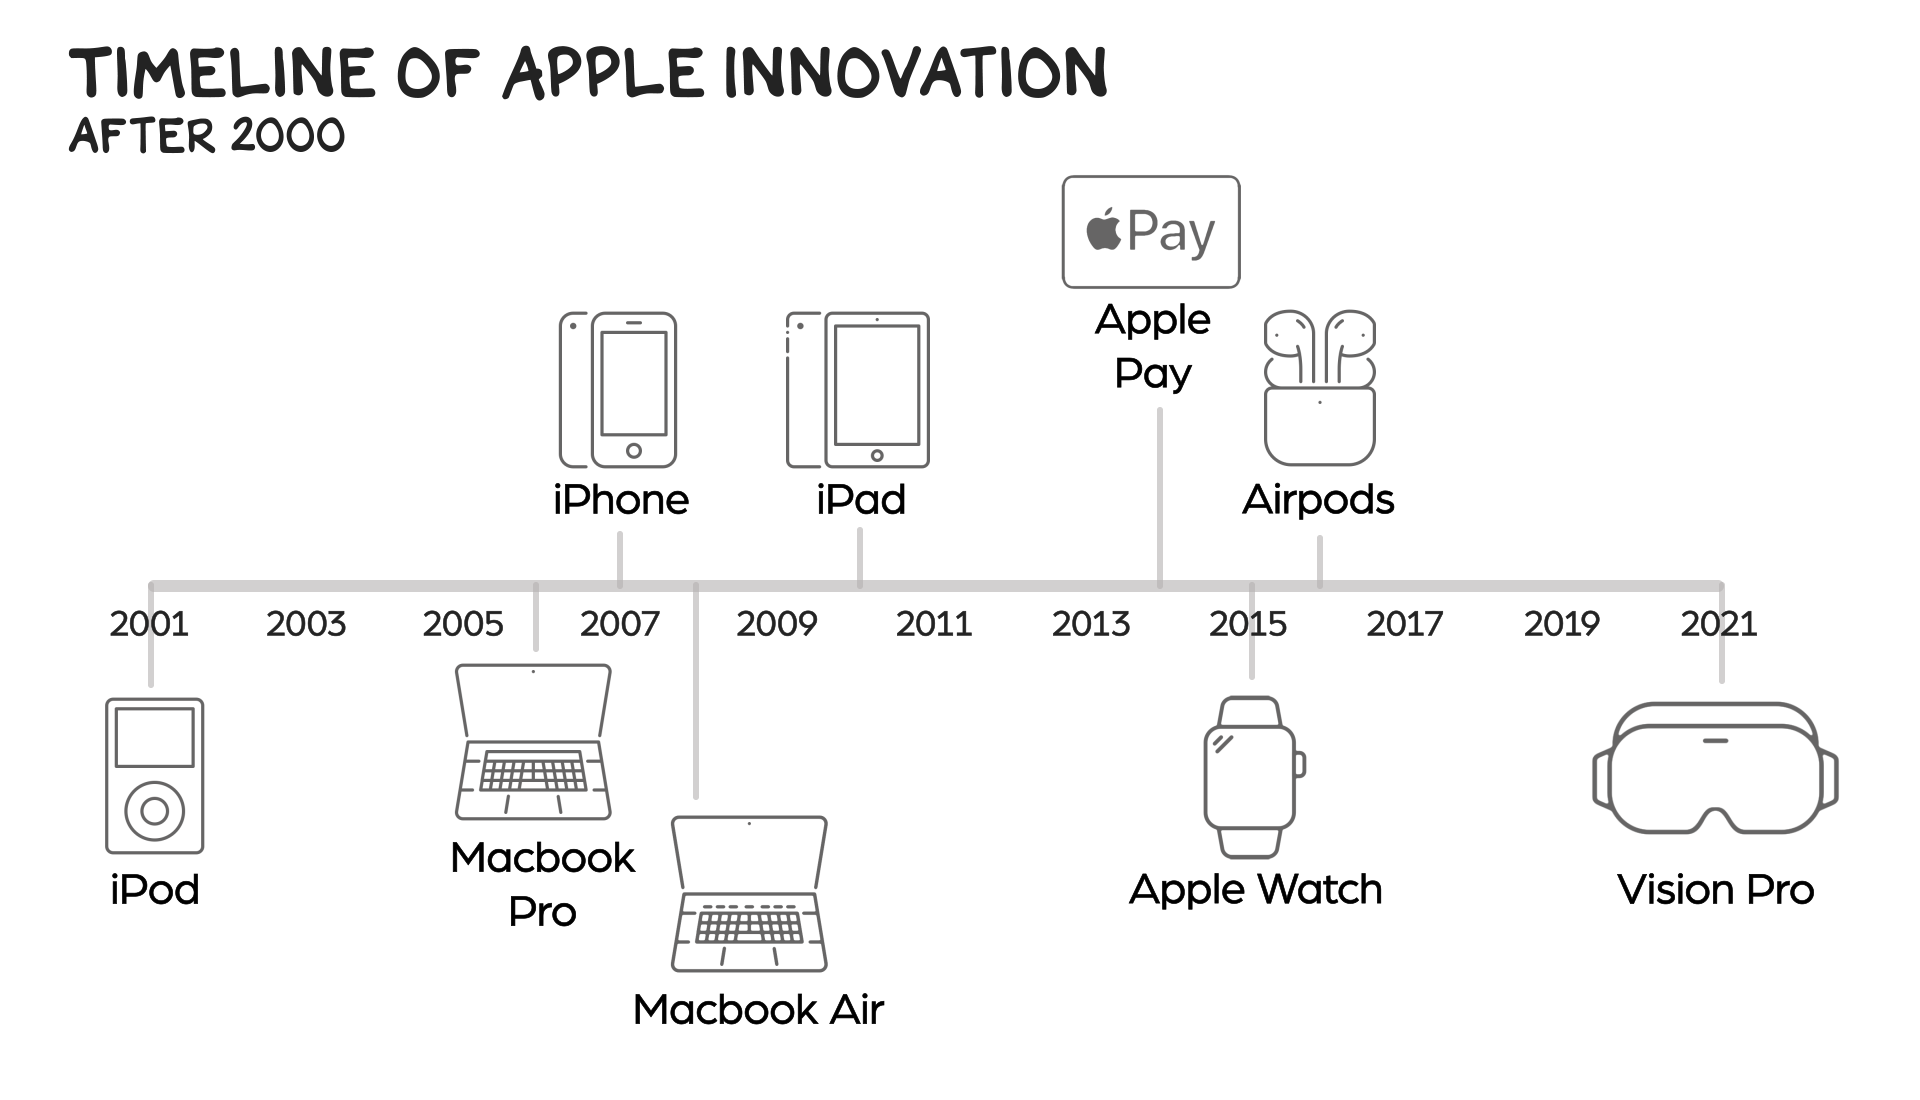 What is Apple? An products and history overview